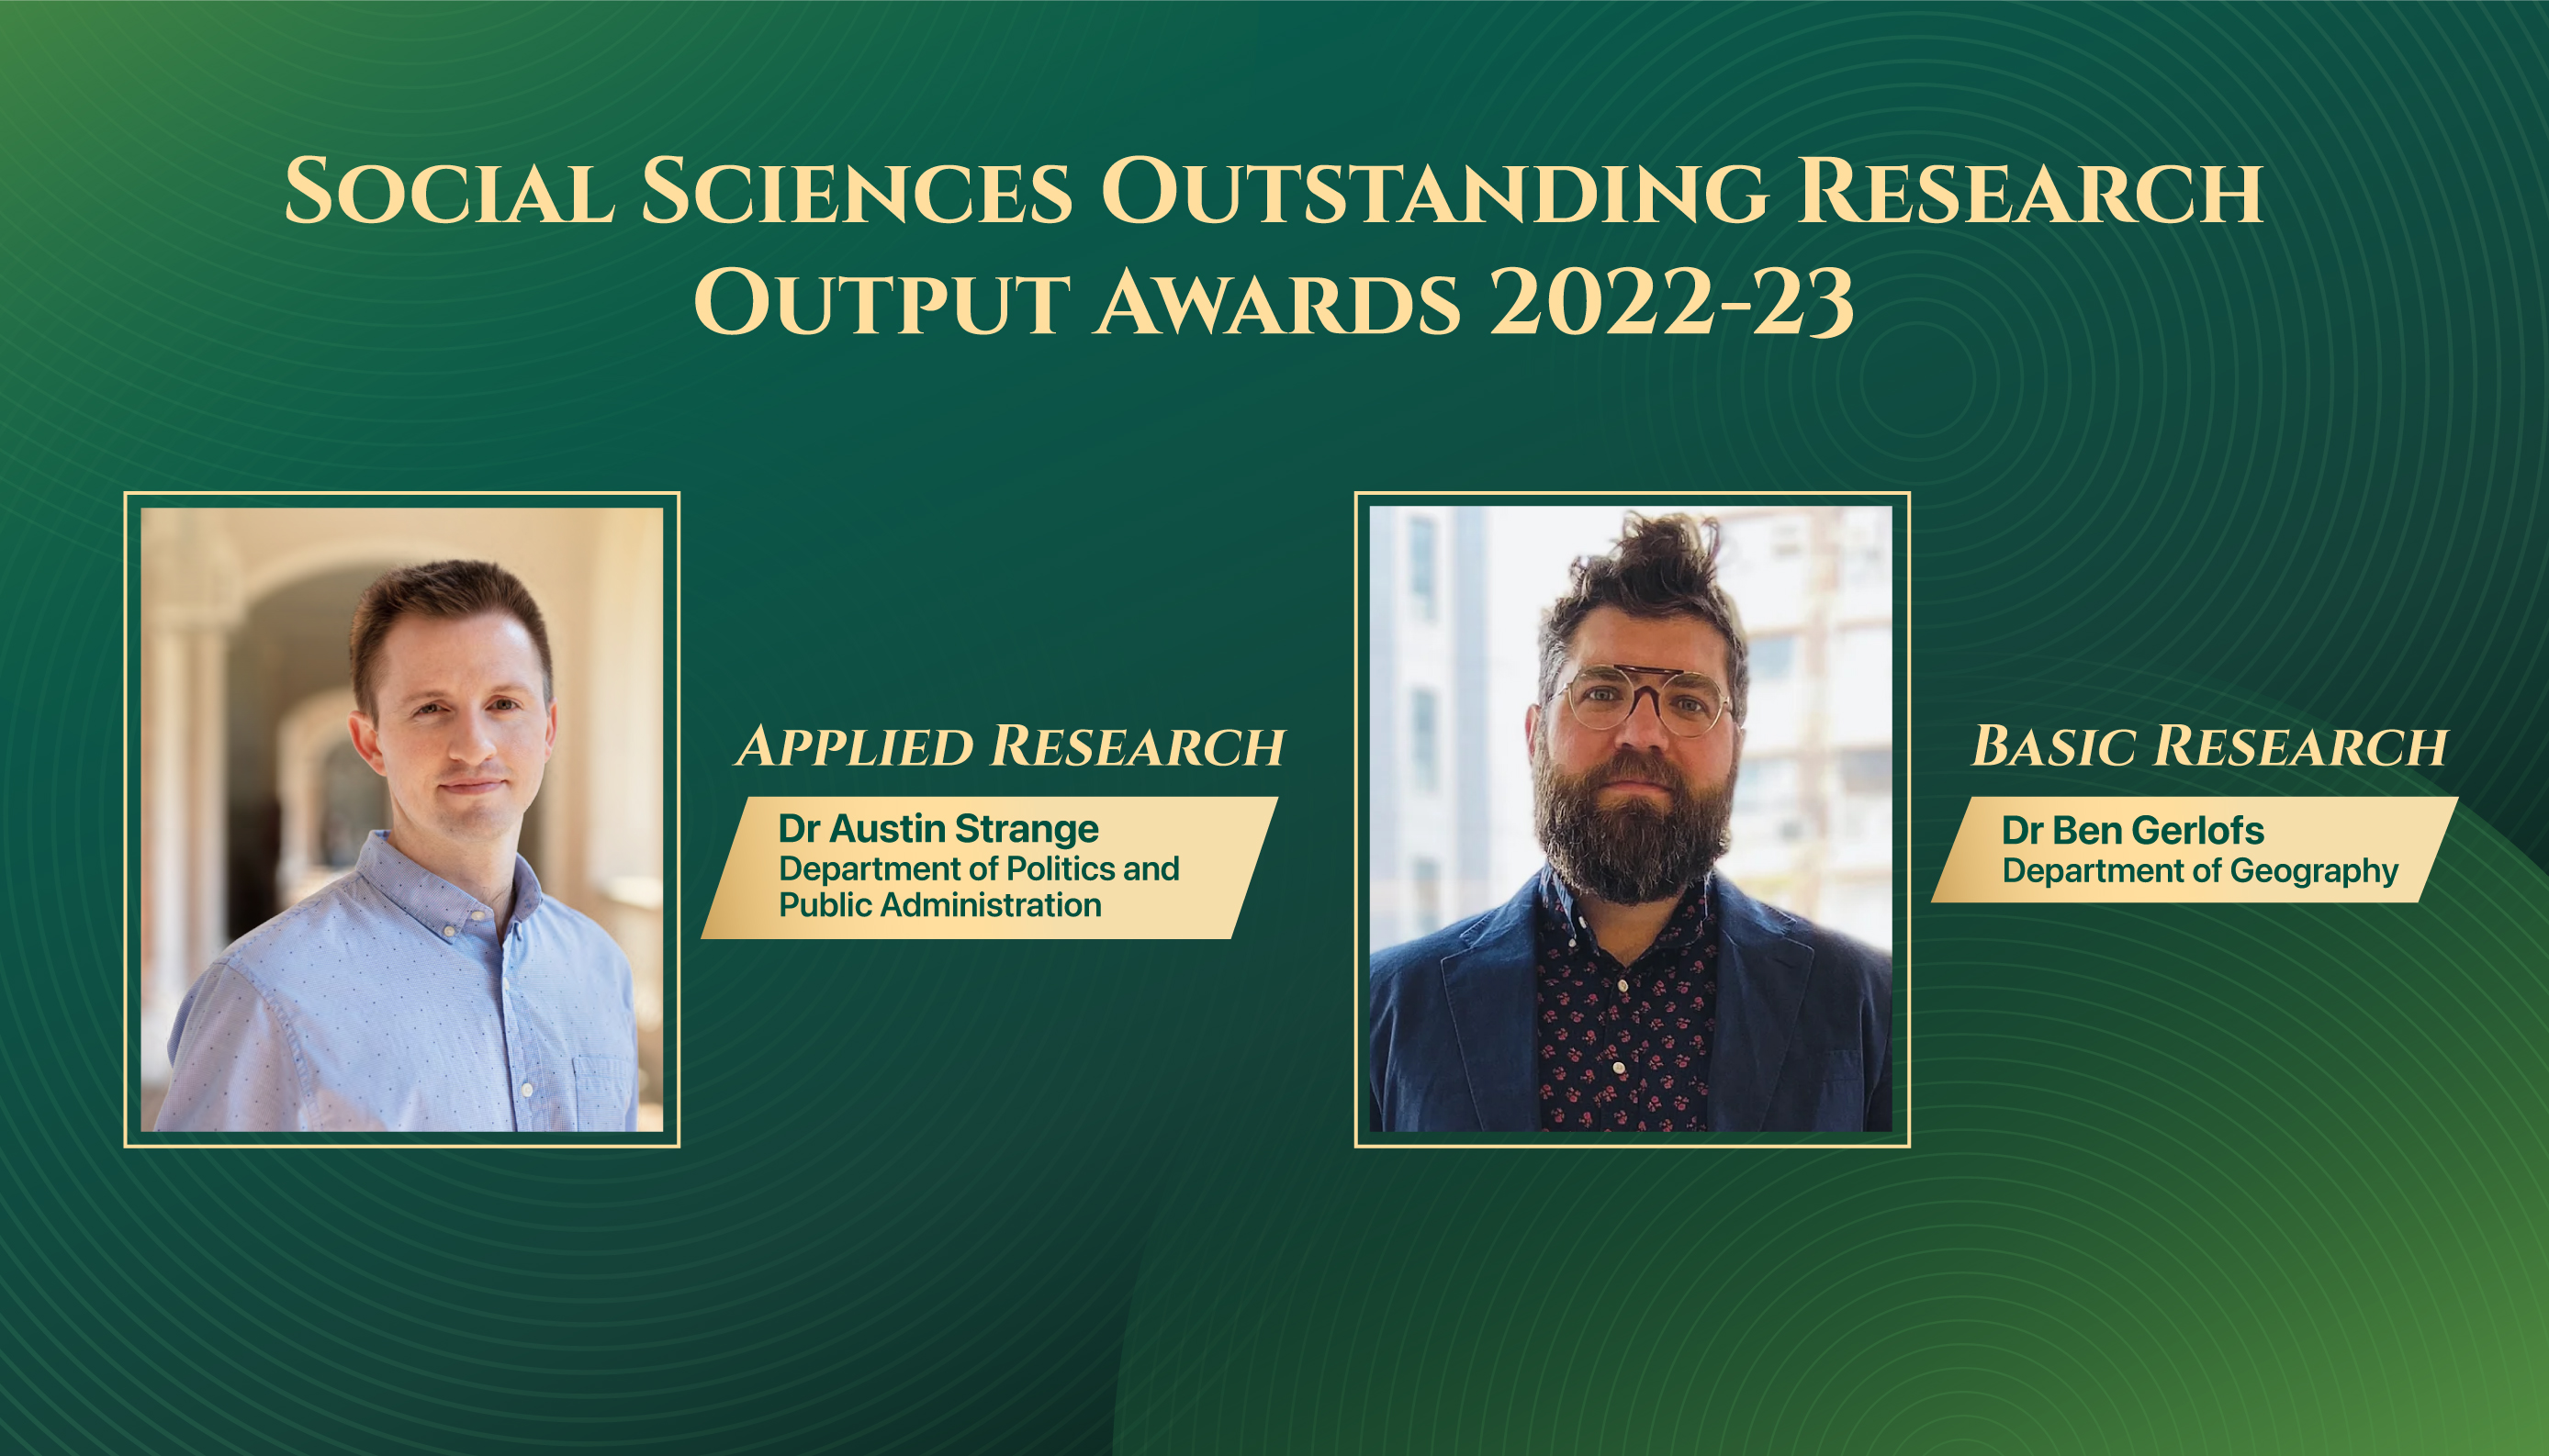 Social Sciences Outstanding Research Output Awards 2022-23